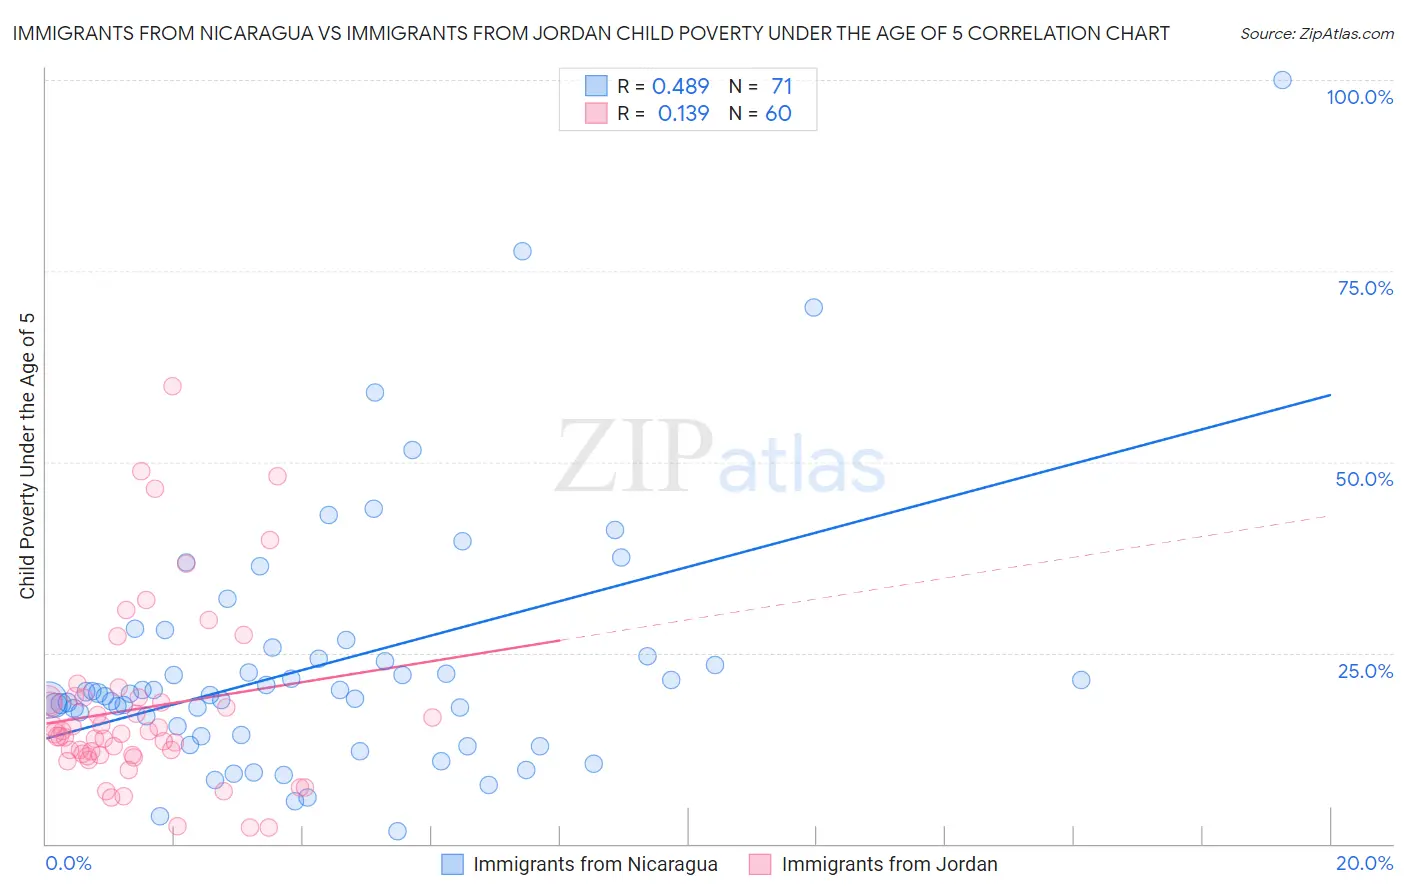 Immigrants from Nicaragua vs Immigrants from Jordan Child Poverty Under the Age of 5